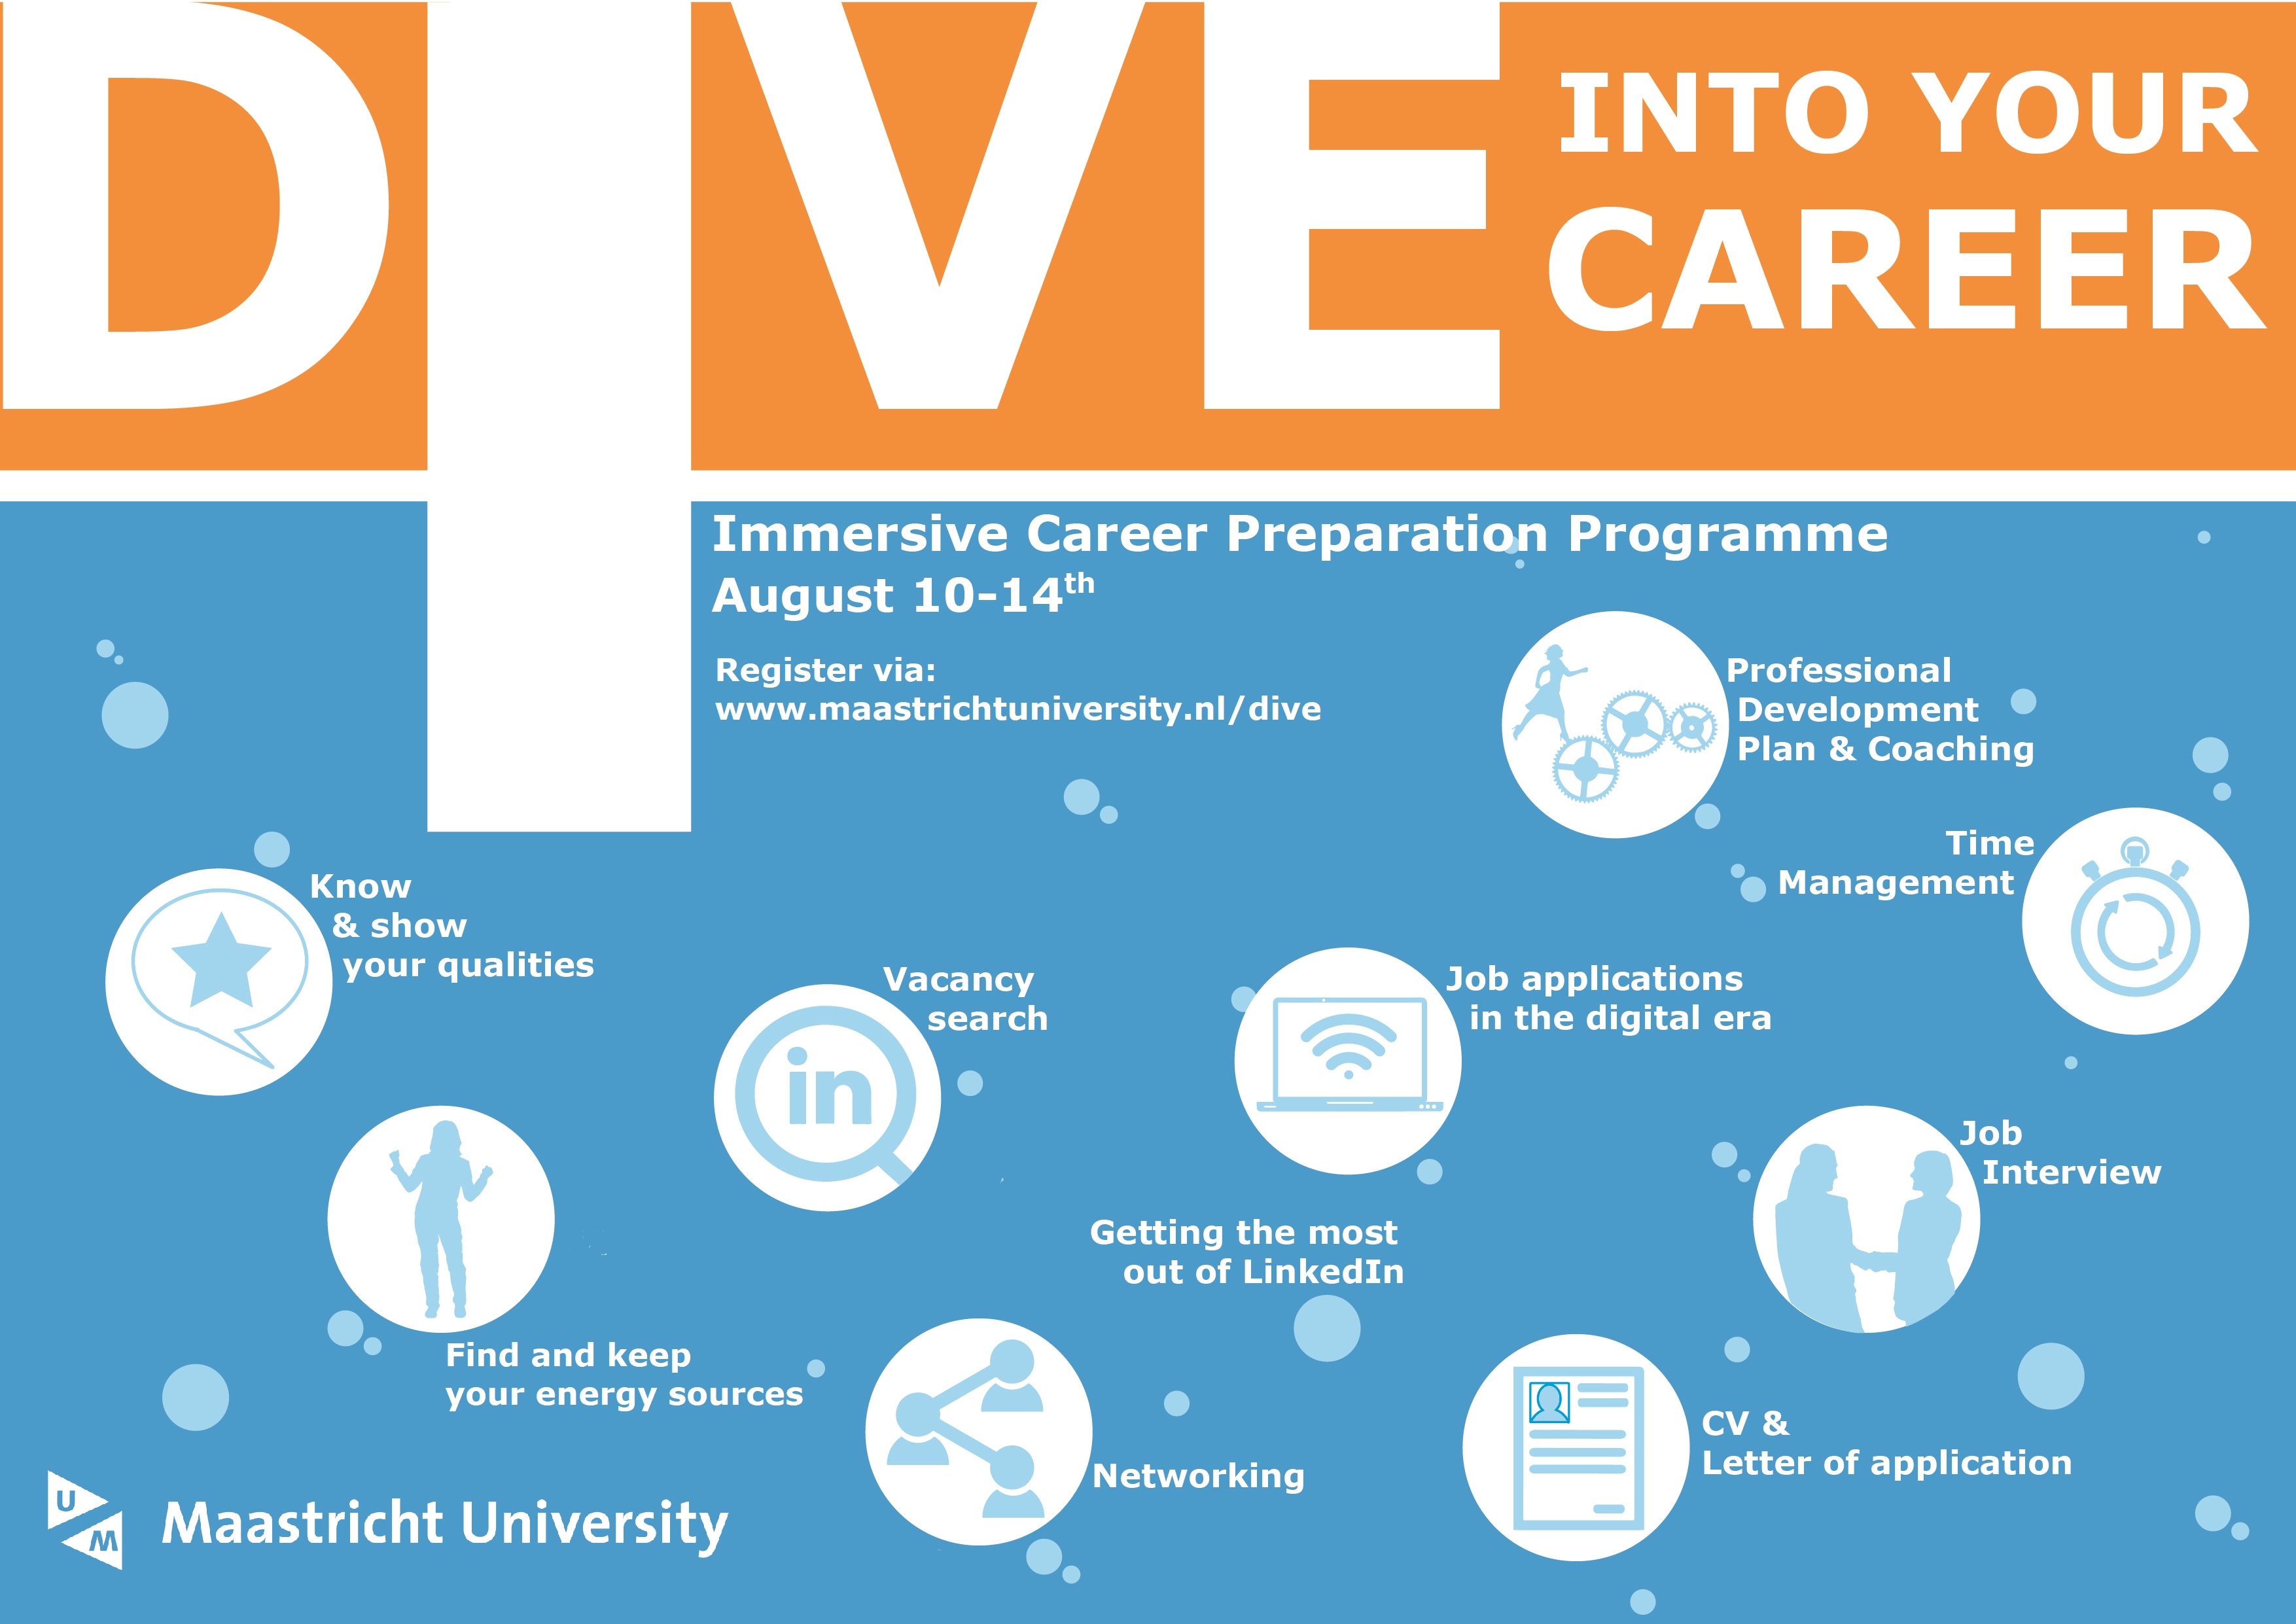 Dive into your career